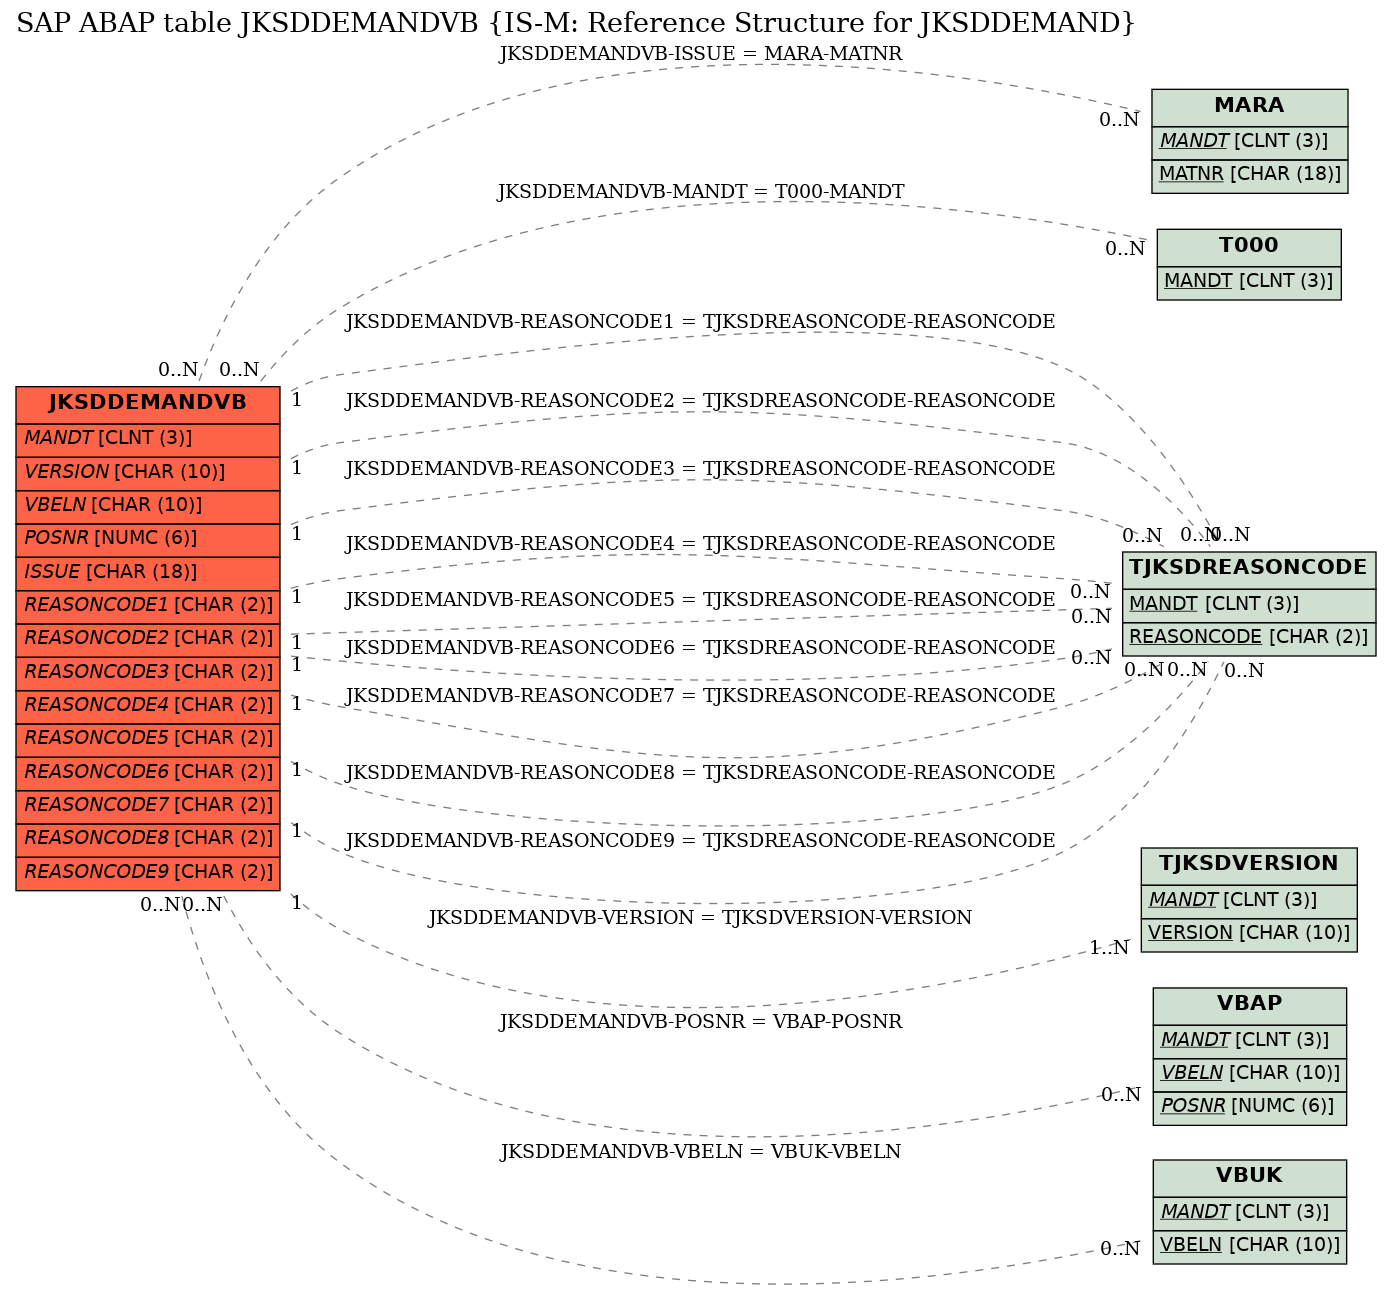 E-R Diagram for table JKSDDEMANDVB (IS-M: Reference Structure for JKSDDEMAND)